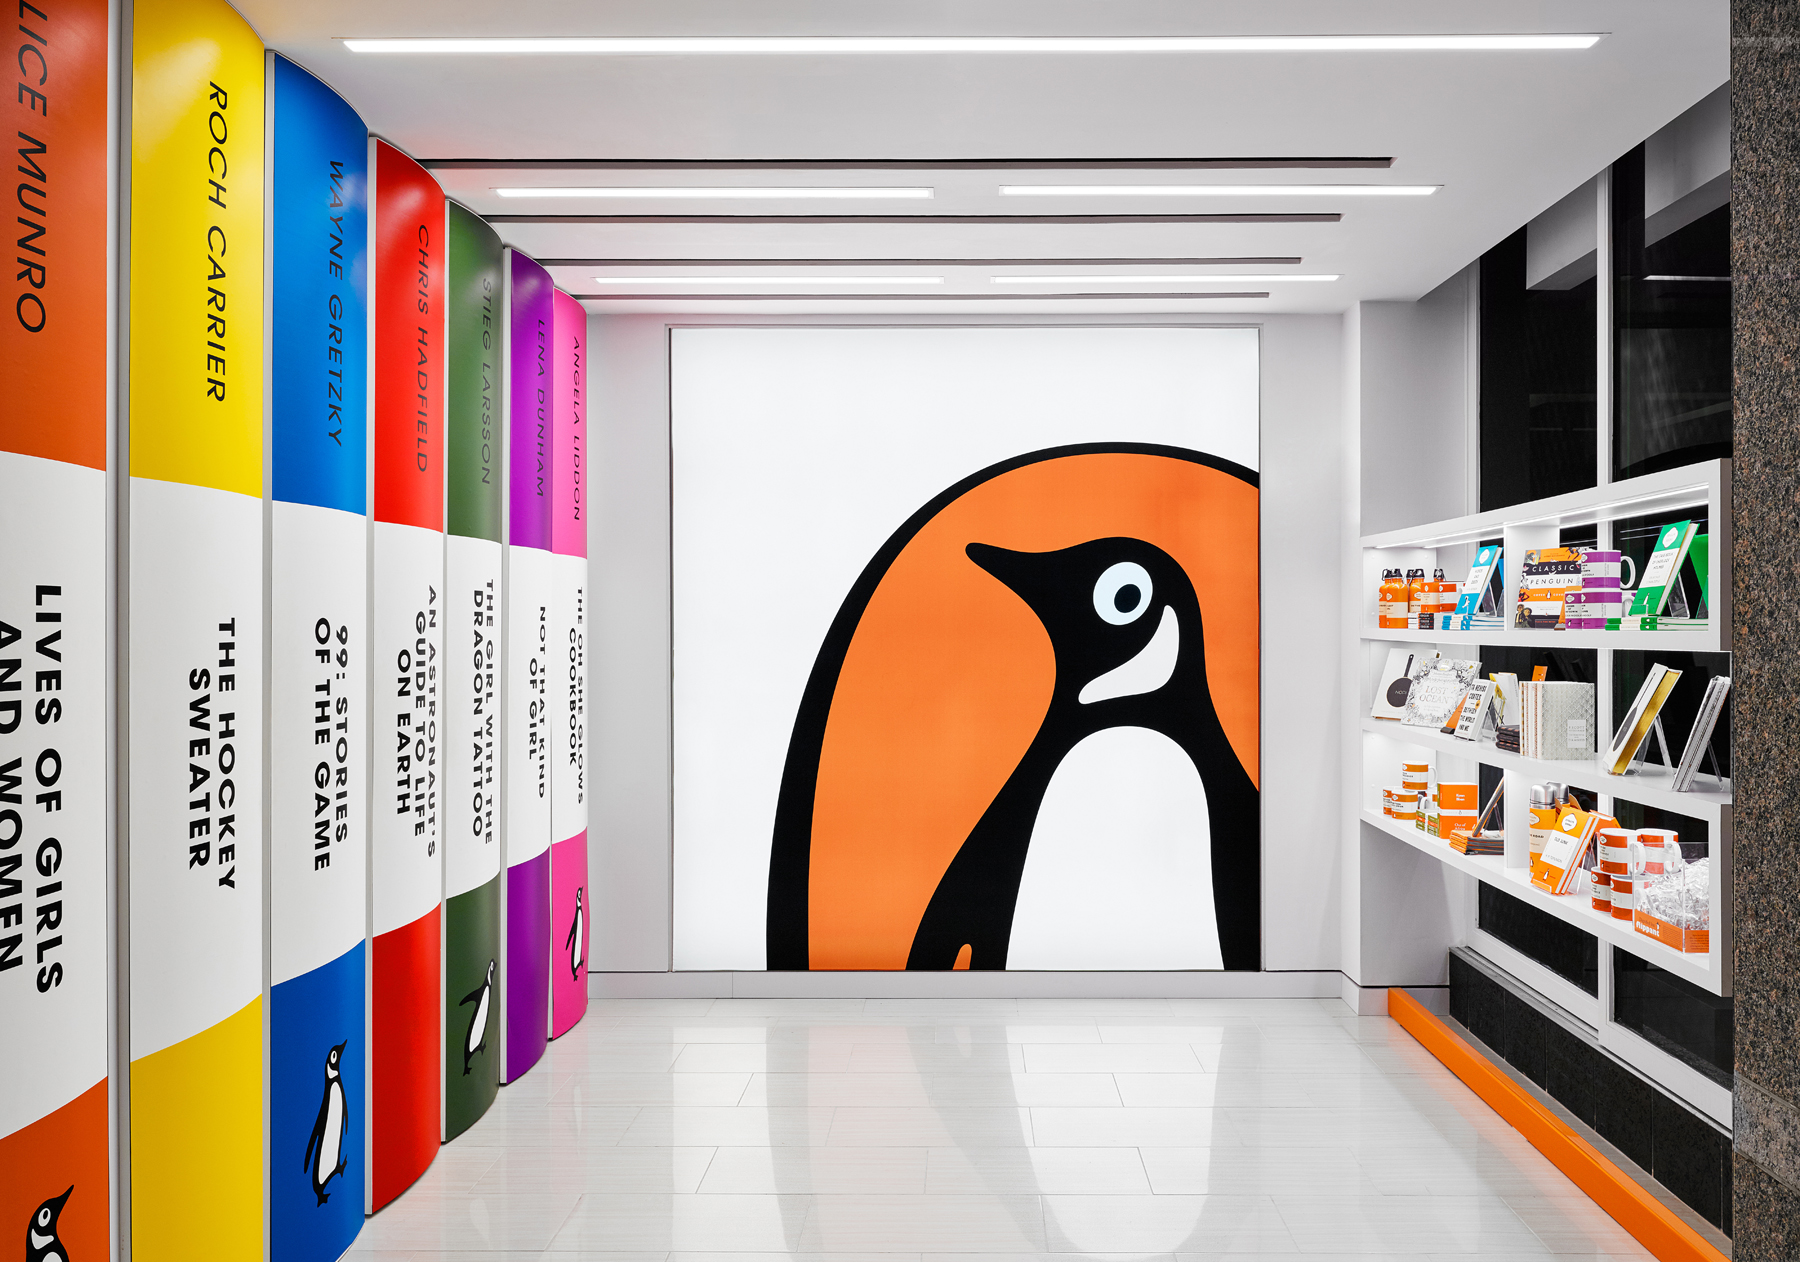 Penguin Shop with large scale Penguin logo on wall and pullout shelves printed with Penguin book spines